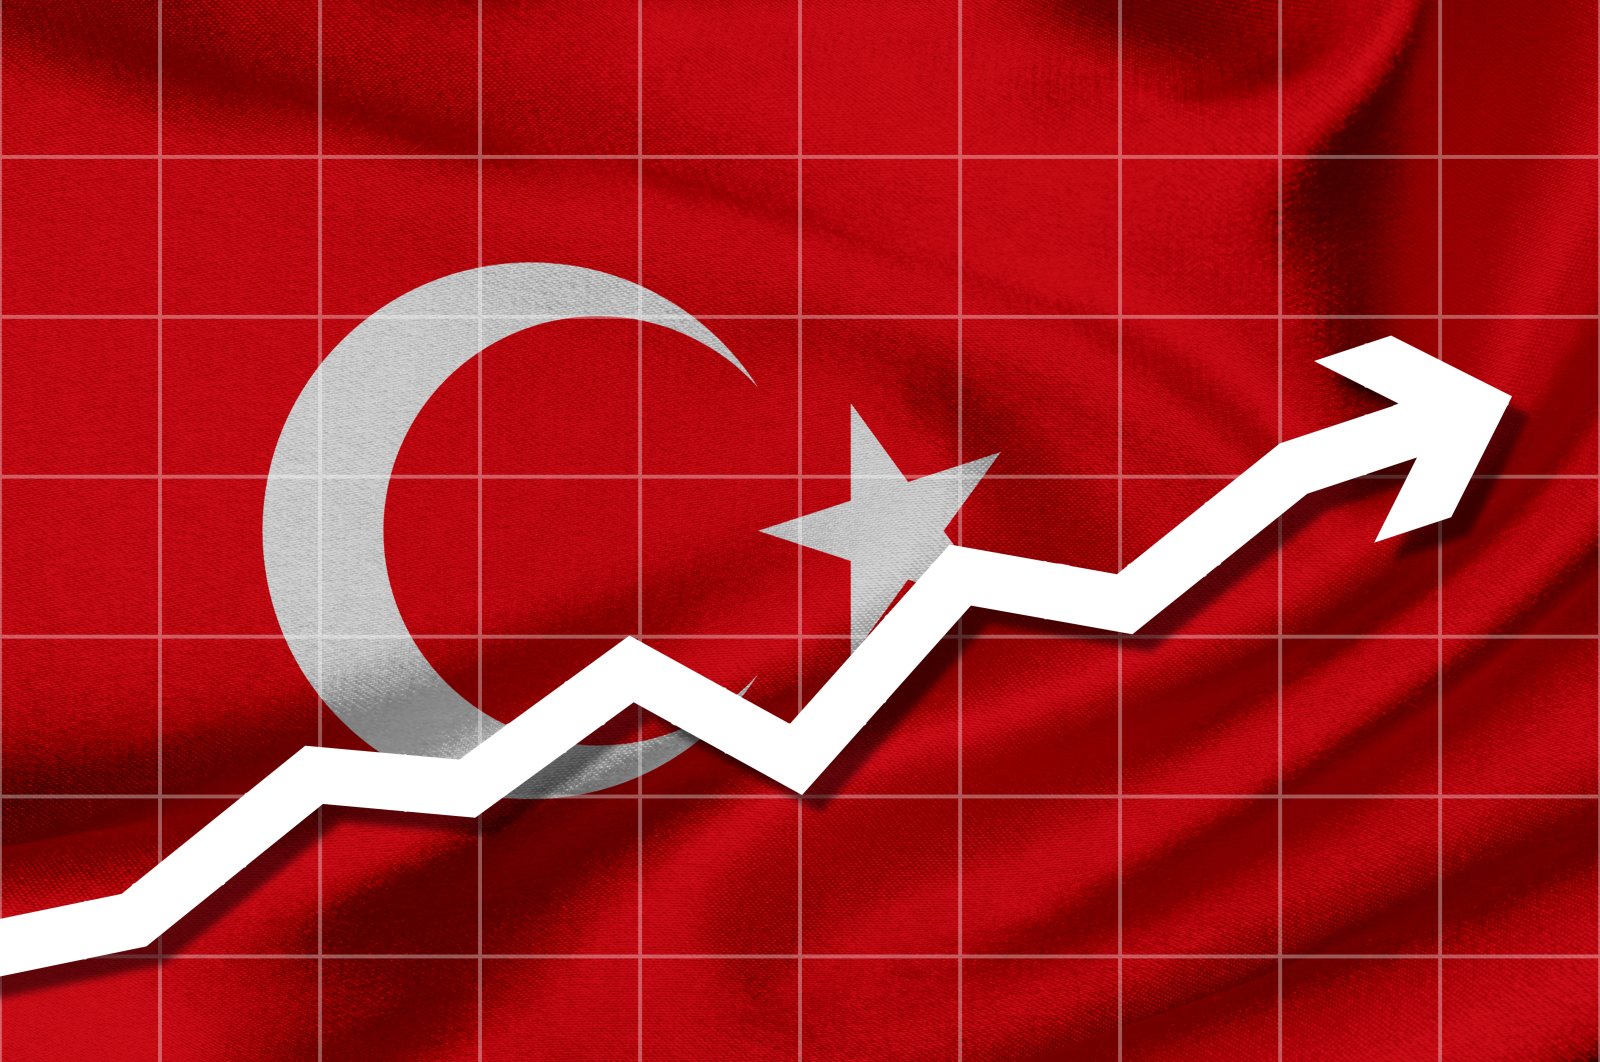 Türkiye, with its strong institutional structures, increasing technology investments and new successful endeavors, dynamic entrepreneurial culture, solid venture base, and close commercial ties with Europe, could indeed be the star of the next few decades. (Shutterstock Photo)